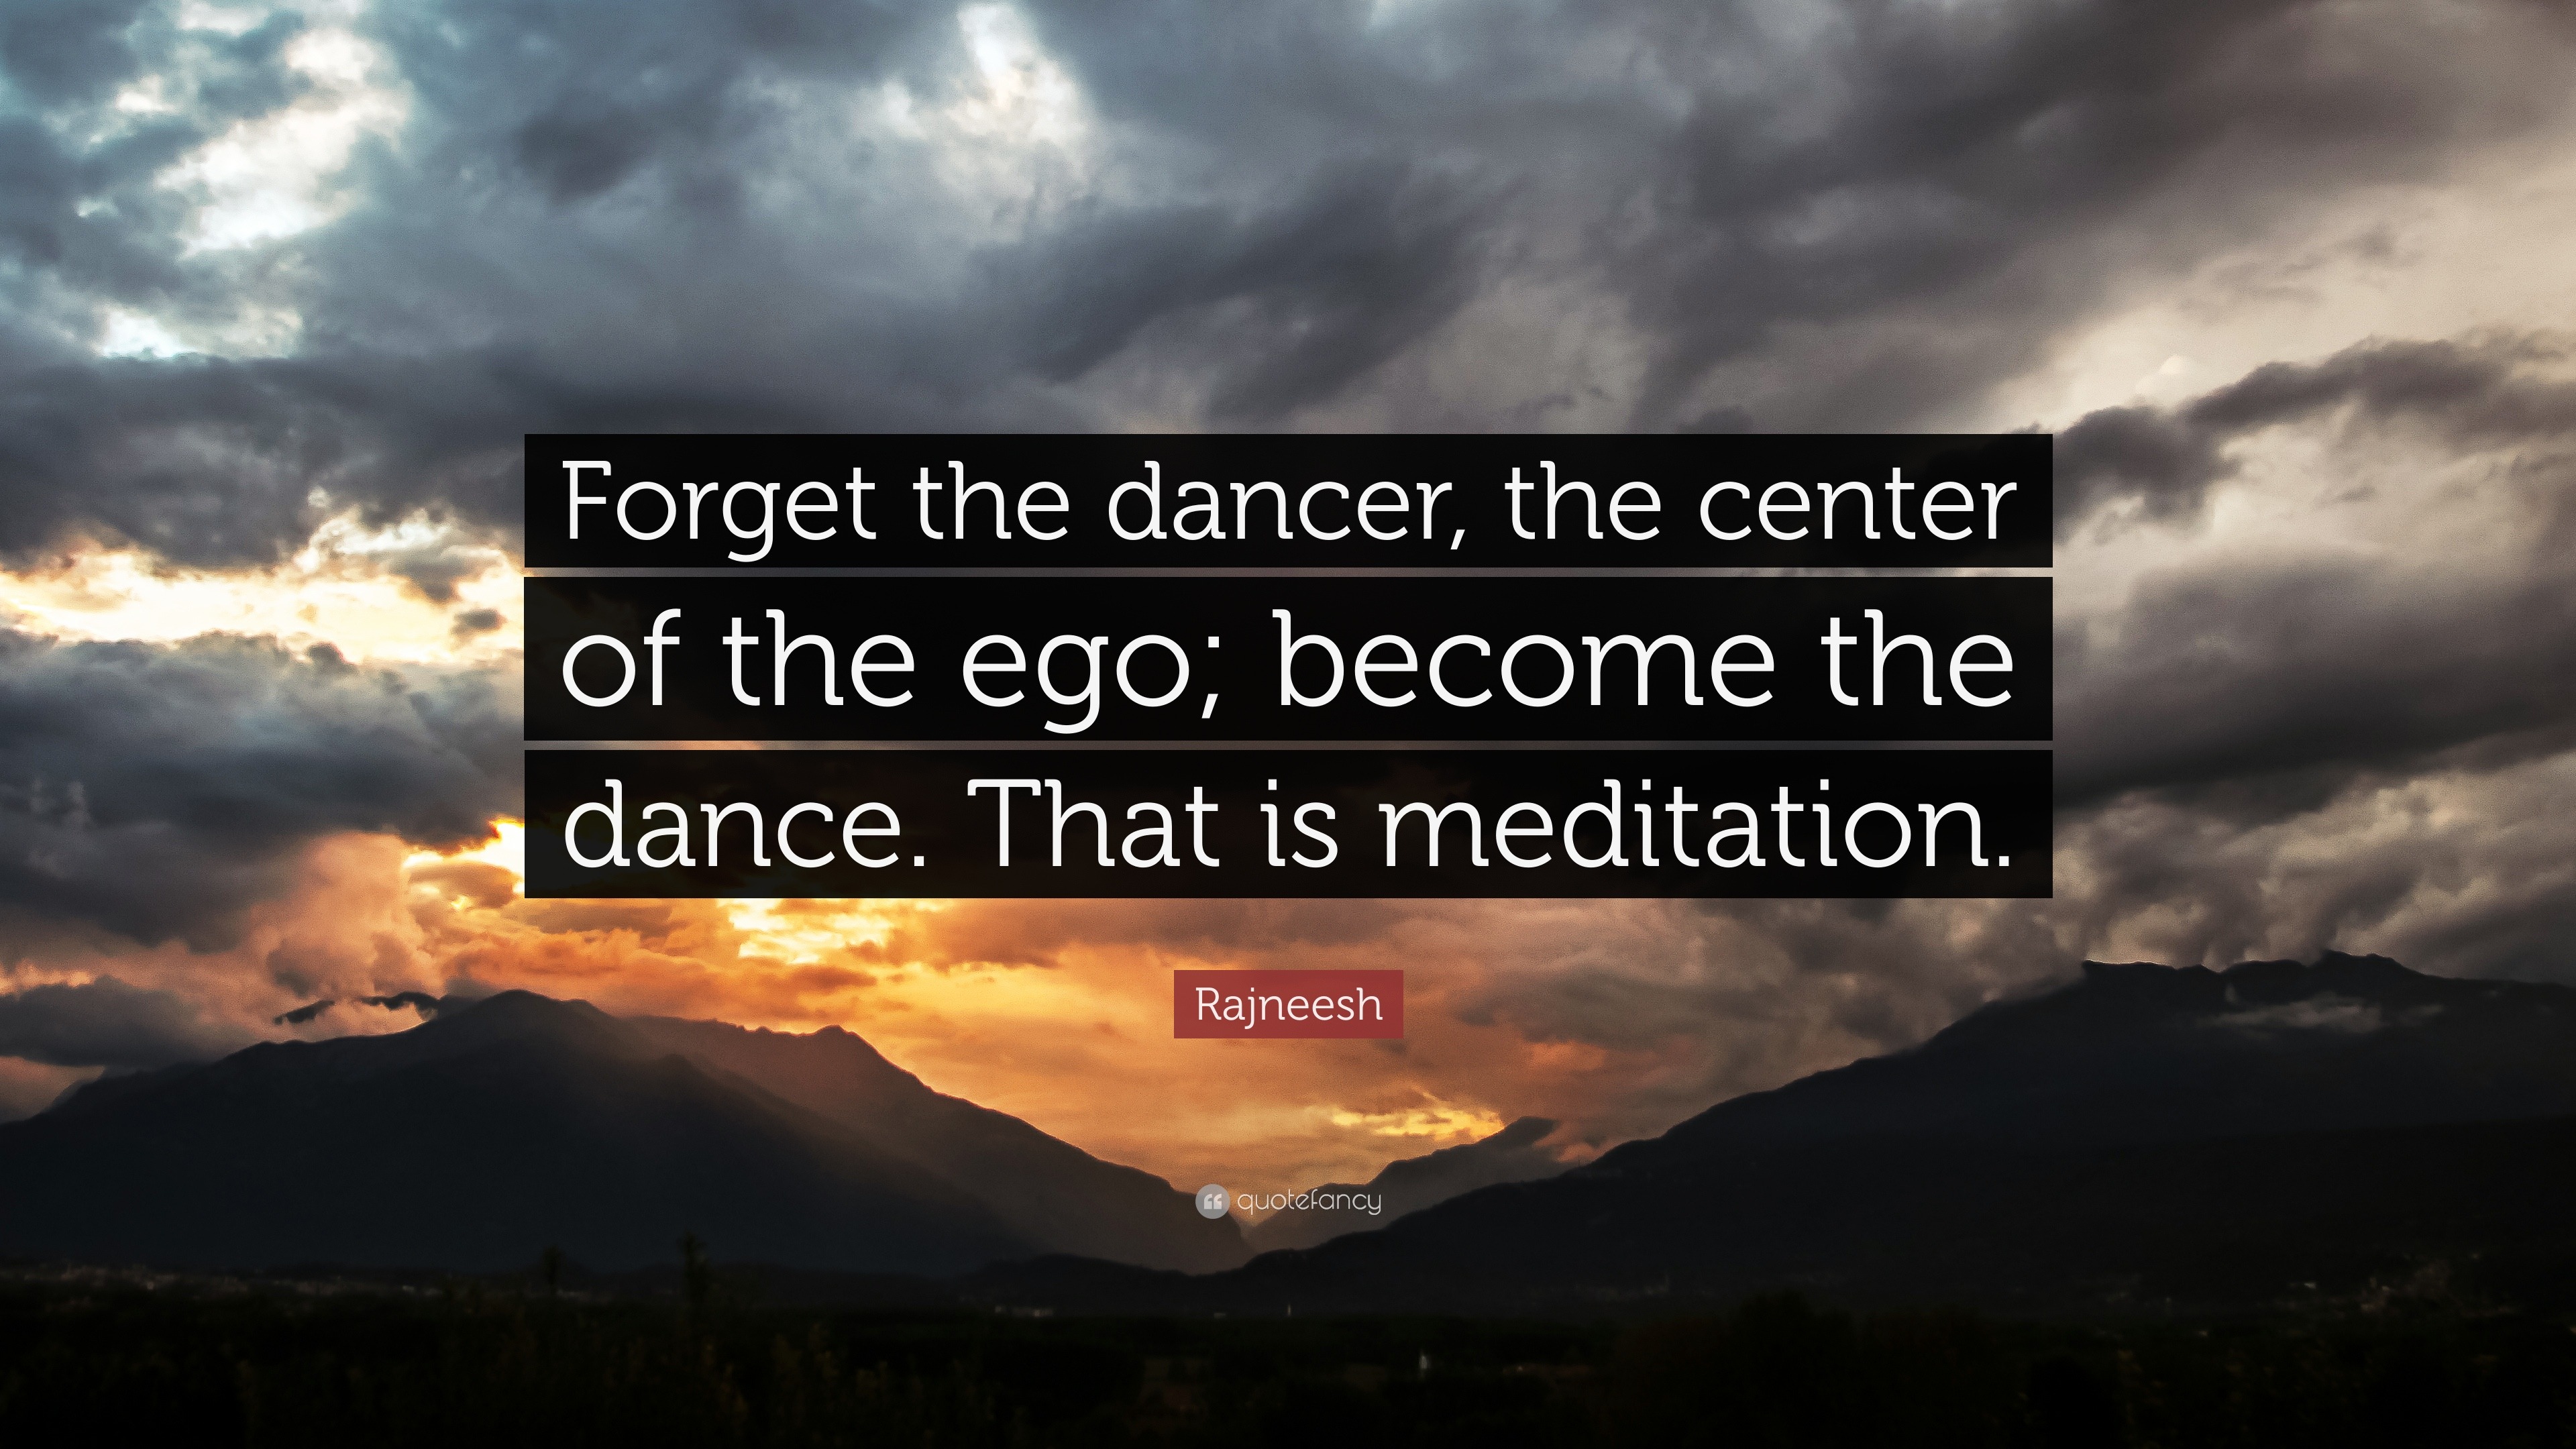 Rajneesh Quote: “Forget the dancer, the center of the ego; become